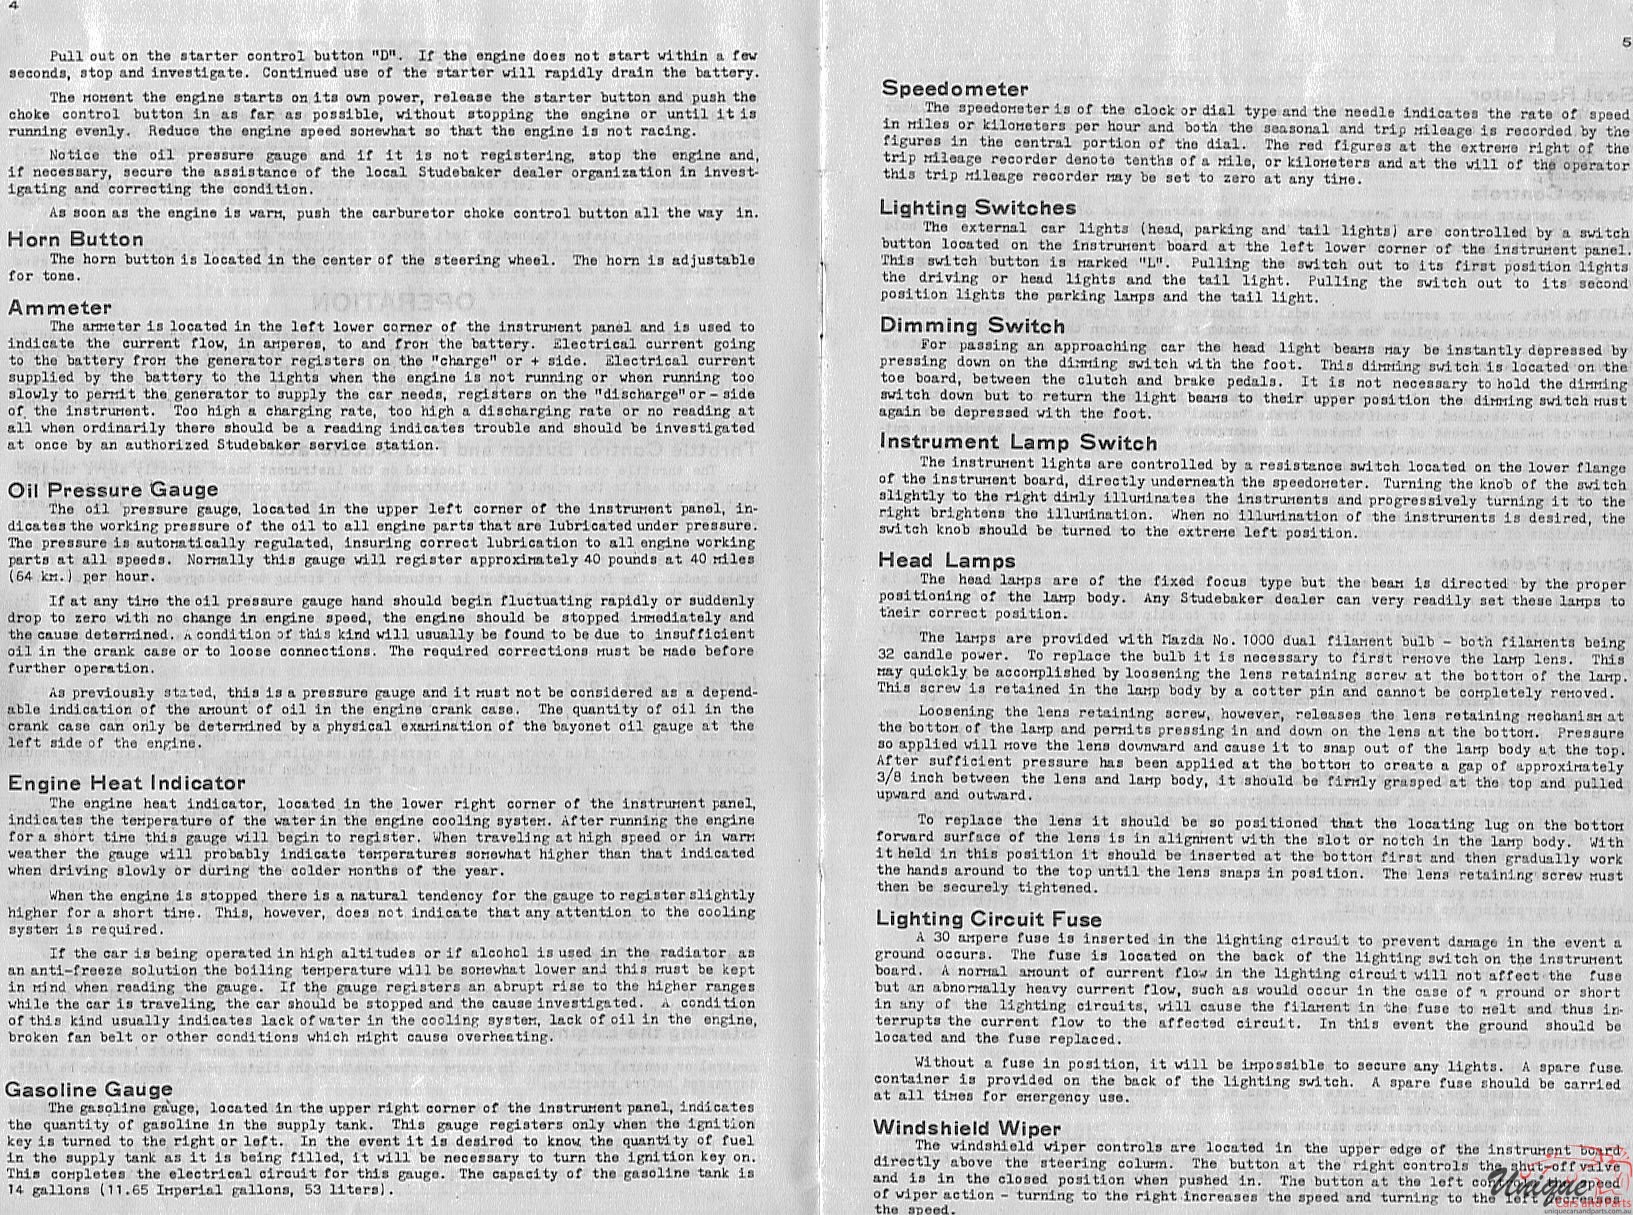 1934 Studebaker Dictator Owners Manual Page 4